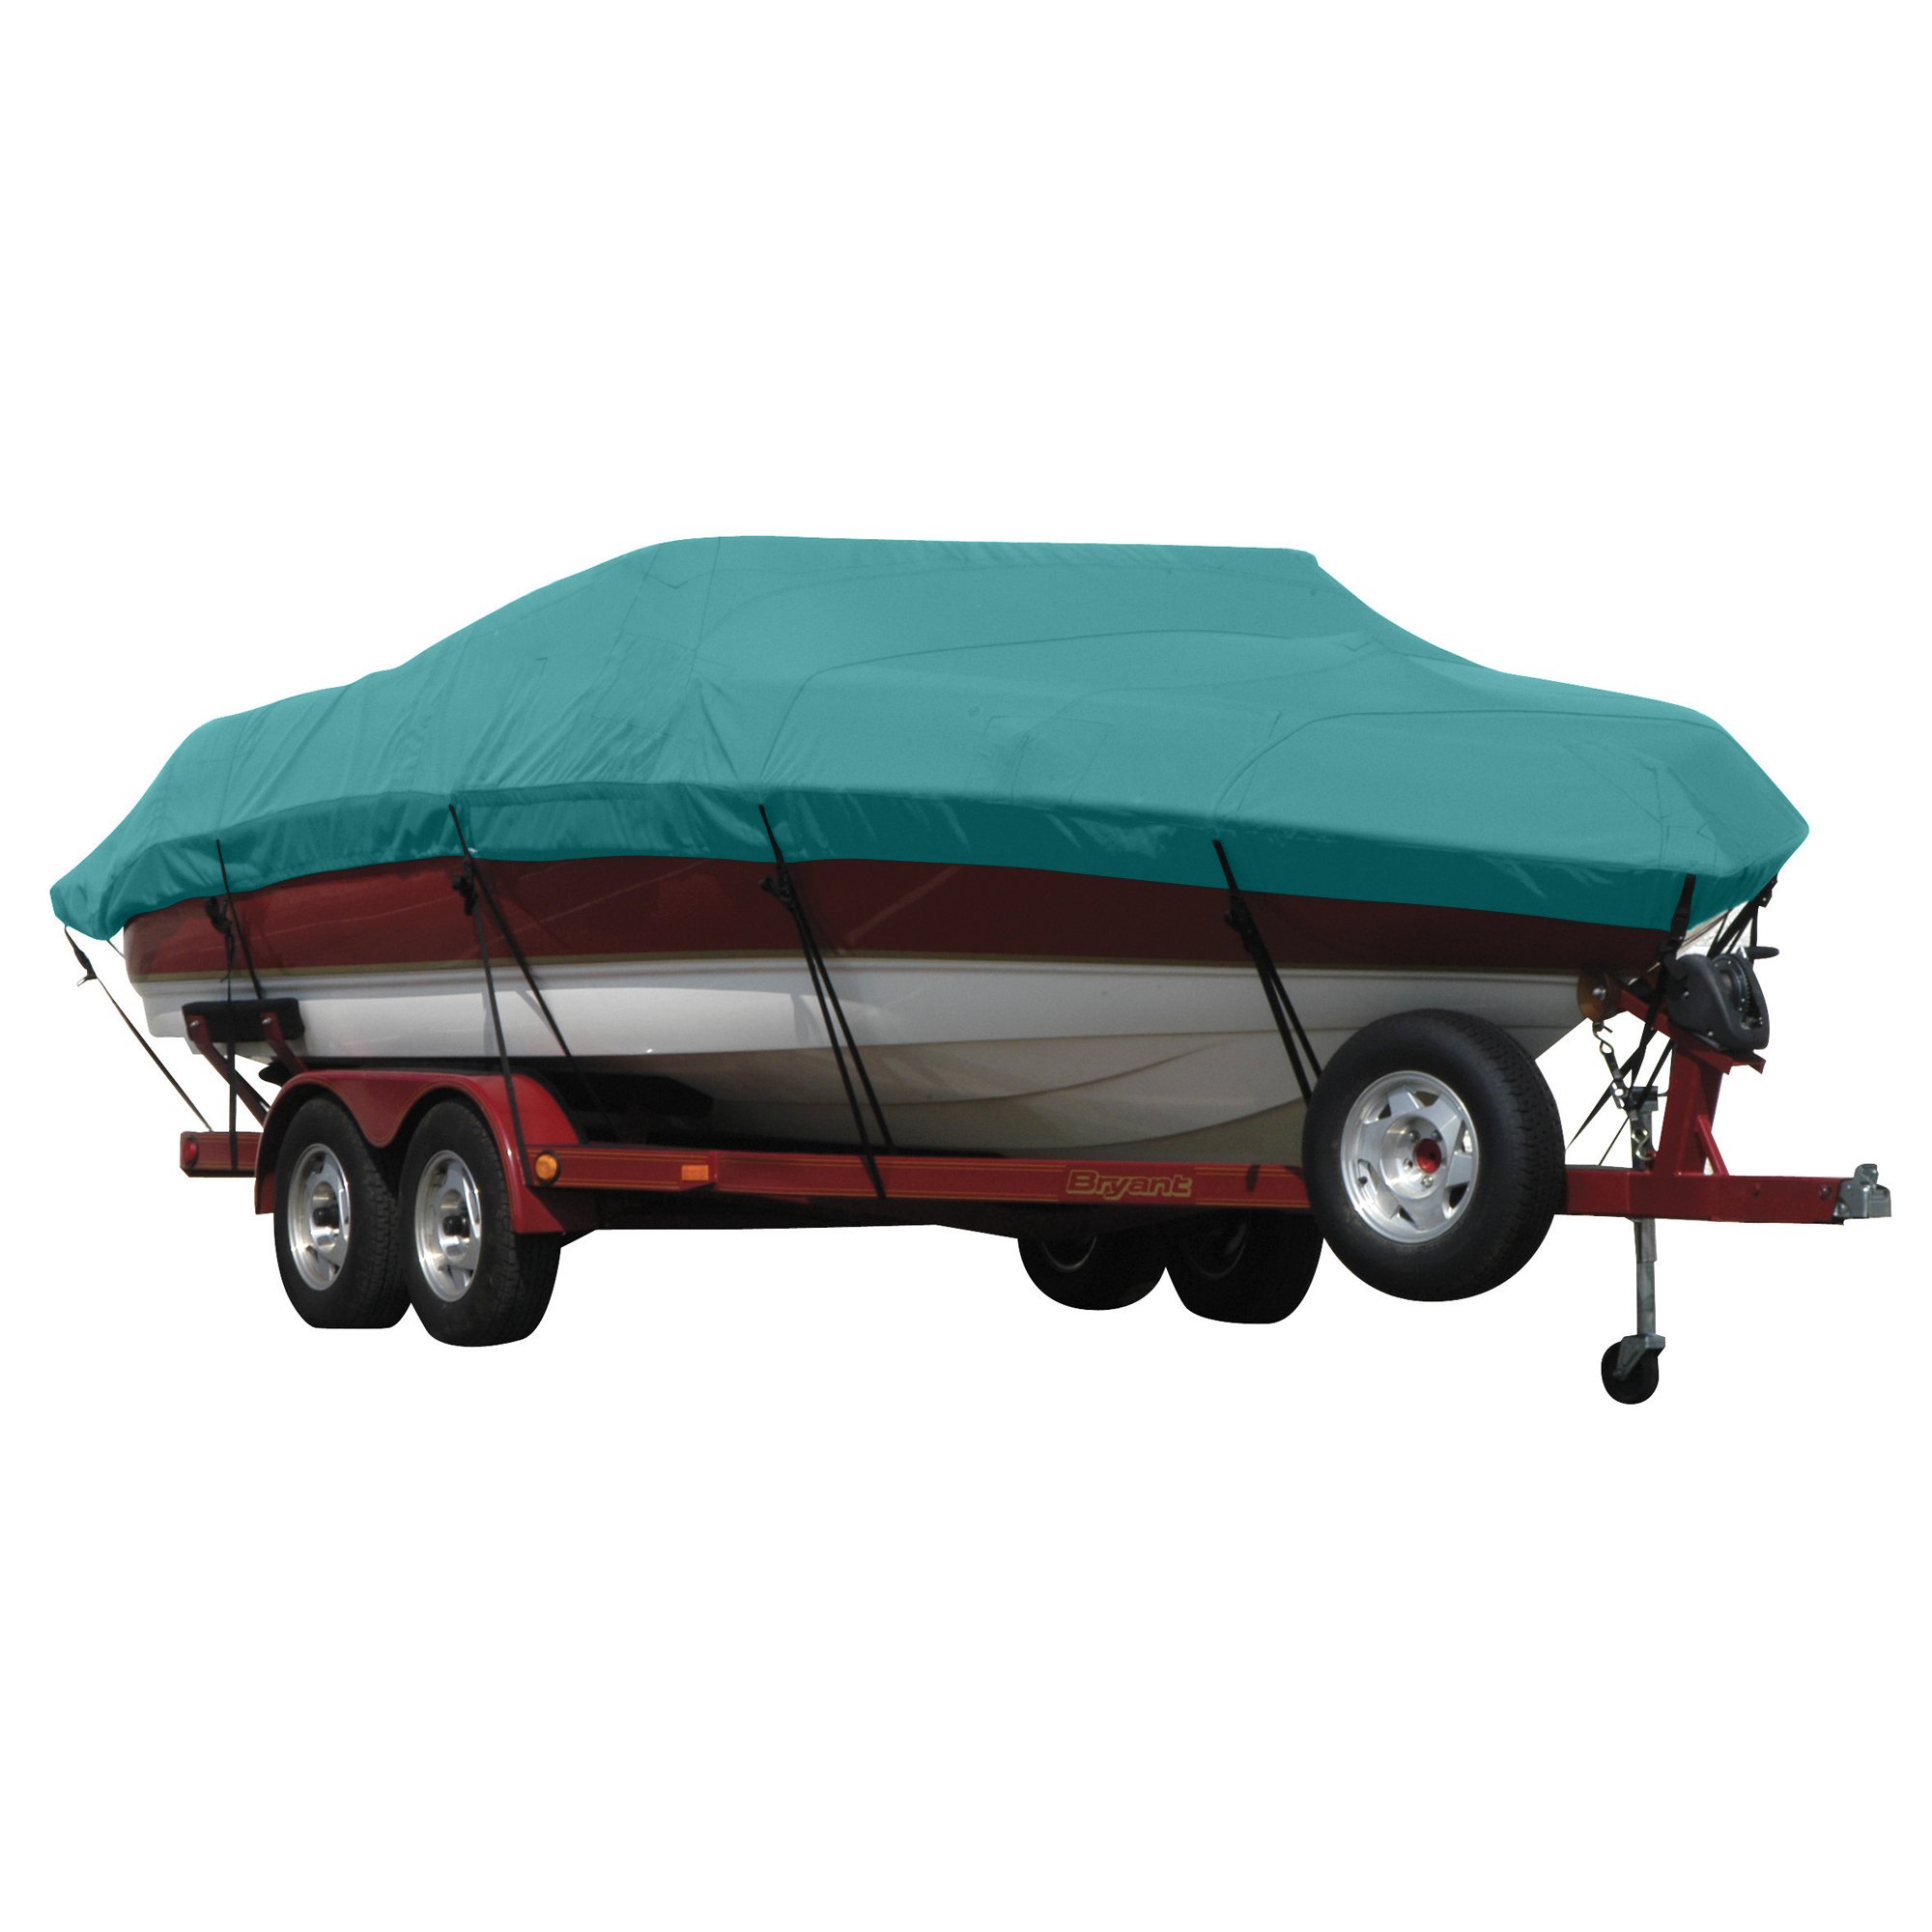 Exact Fit Sunbrella Boat Cover For Mastercraft 190 Prostar Covers